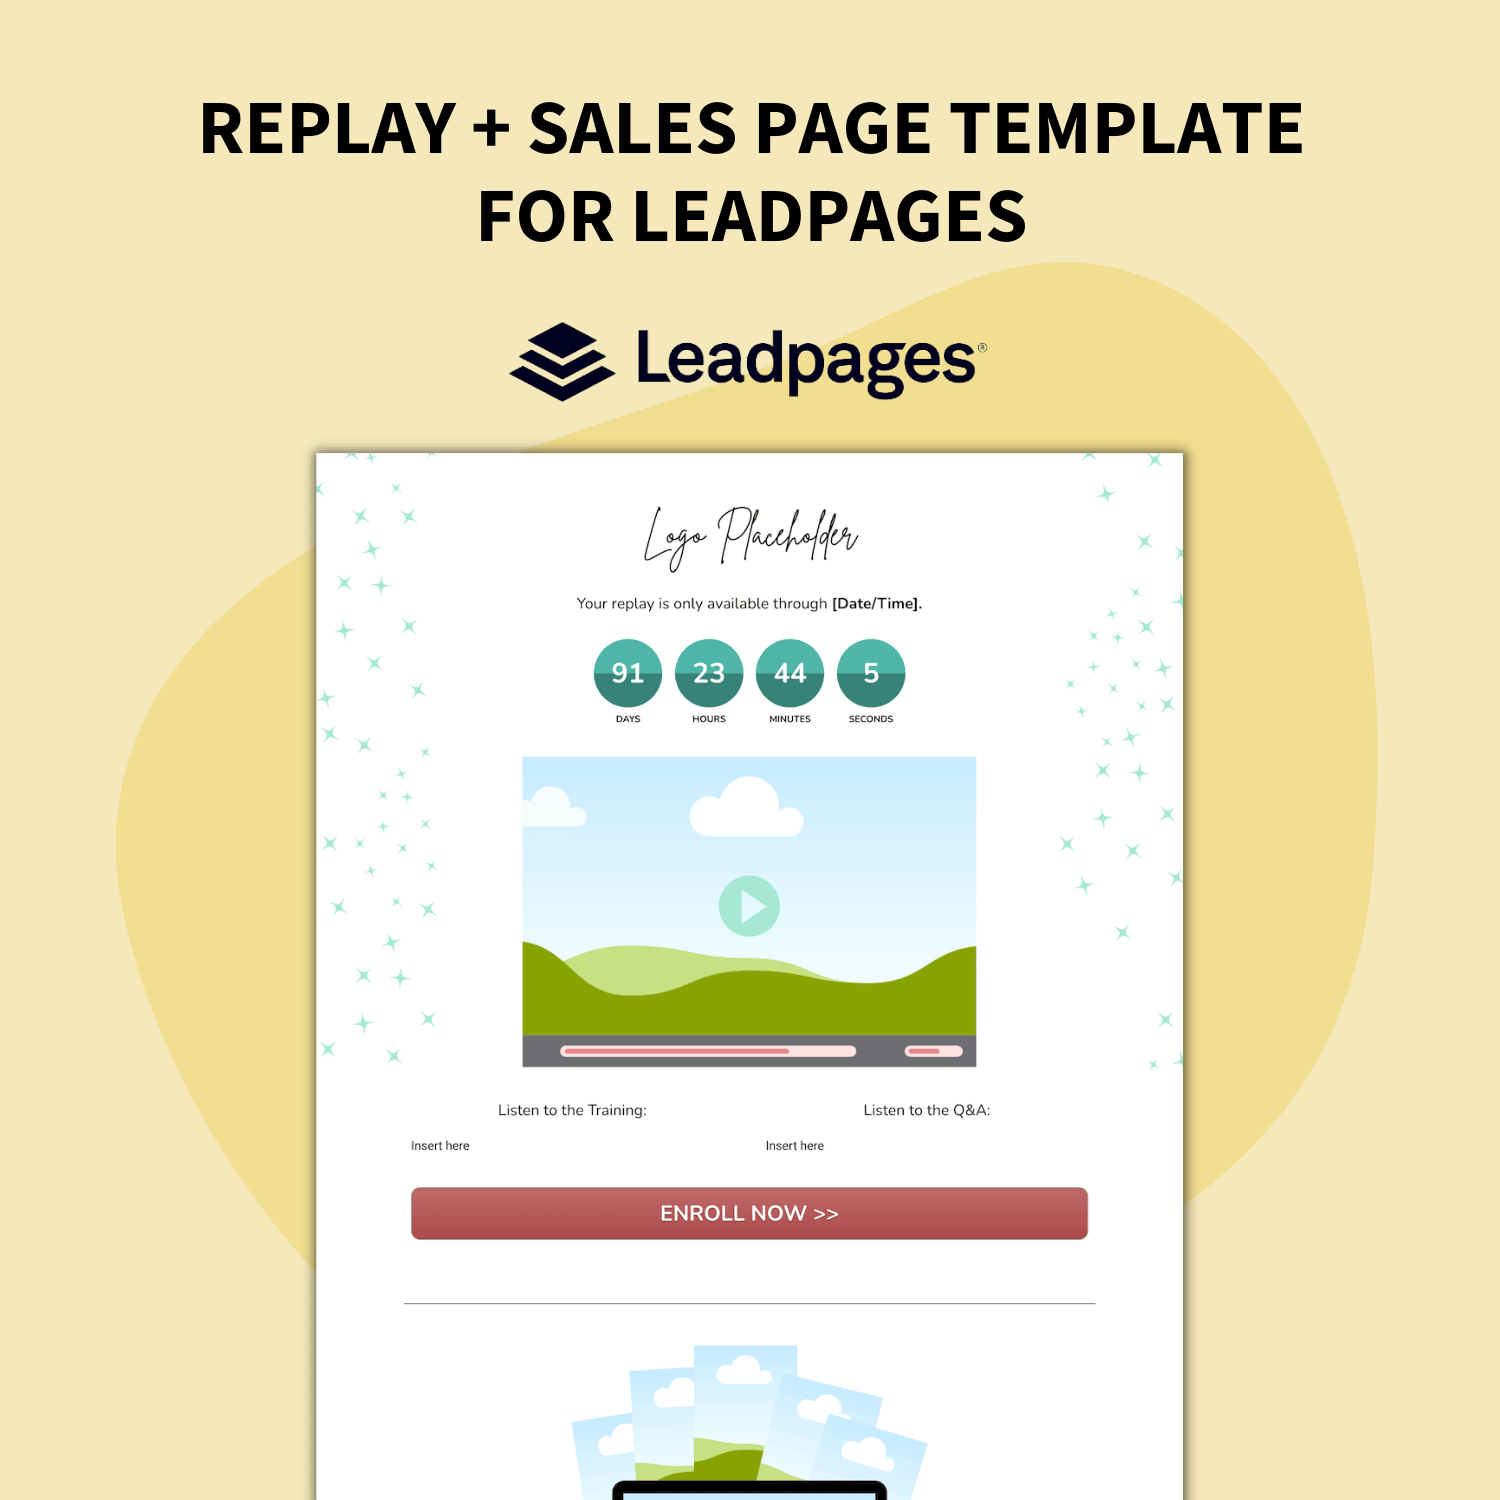 Ultimate Live Launch Toolkit Leadpages Template for Replay and Sales Page